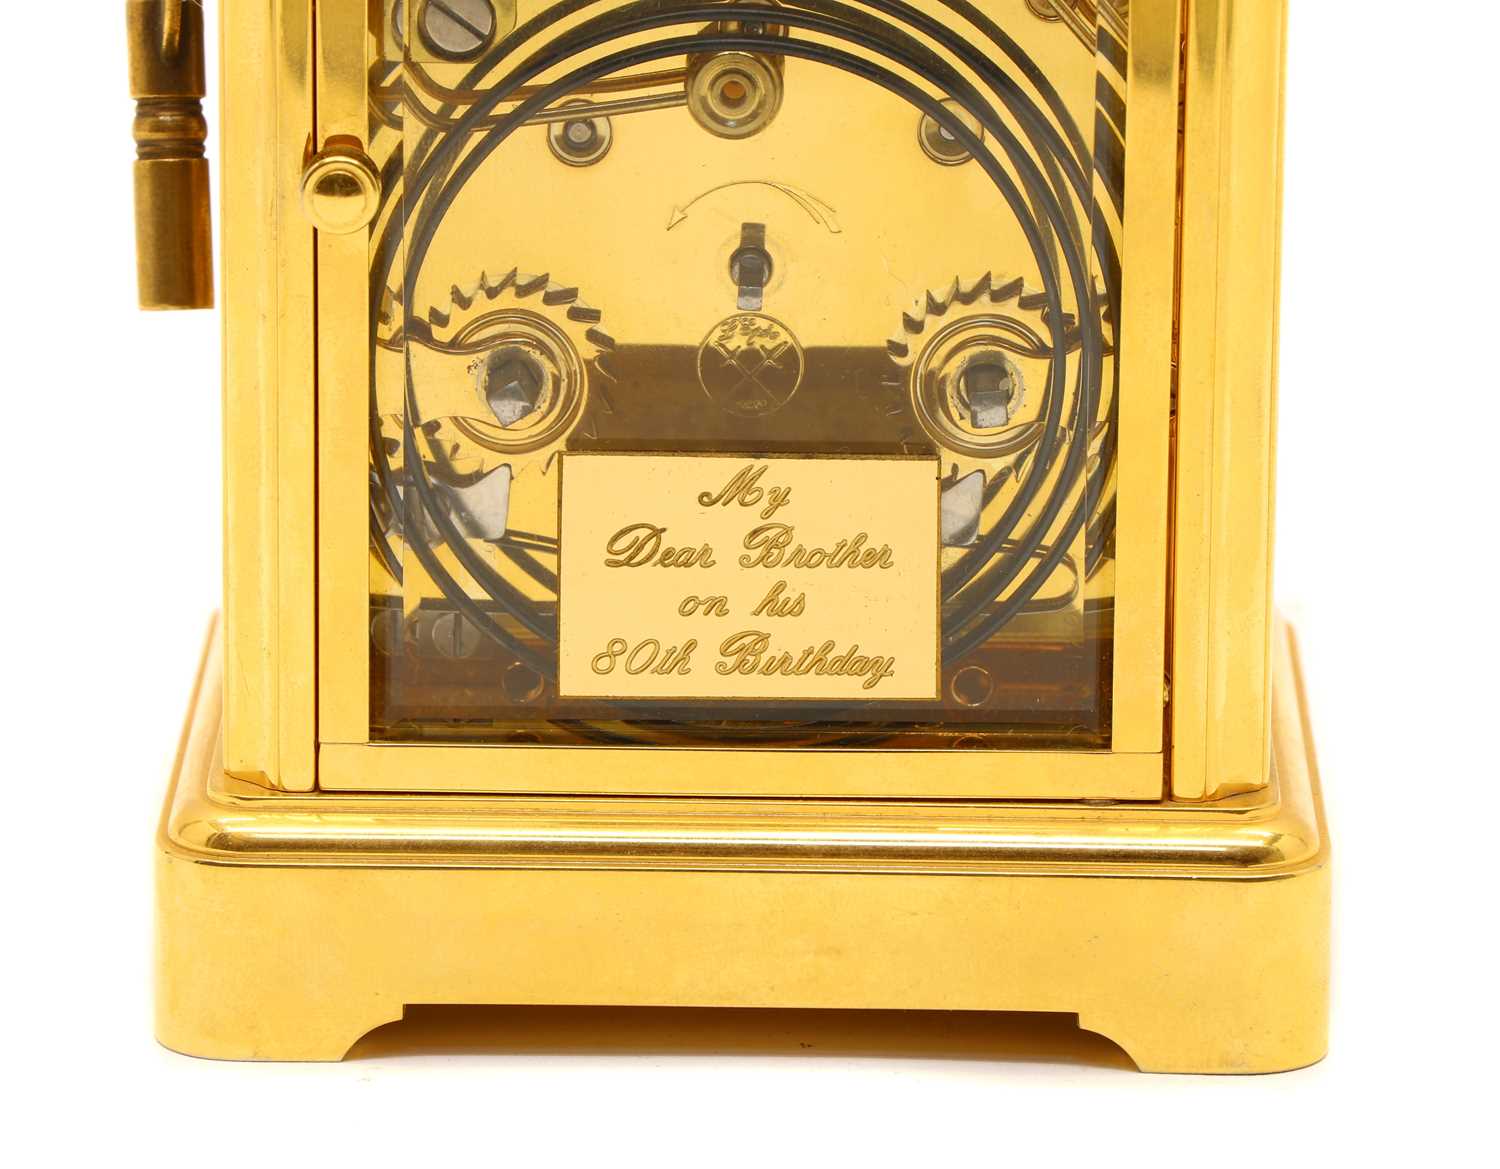 A lacquered brass carriage clock, - Image 4 of 4